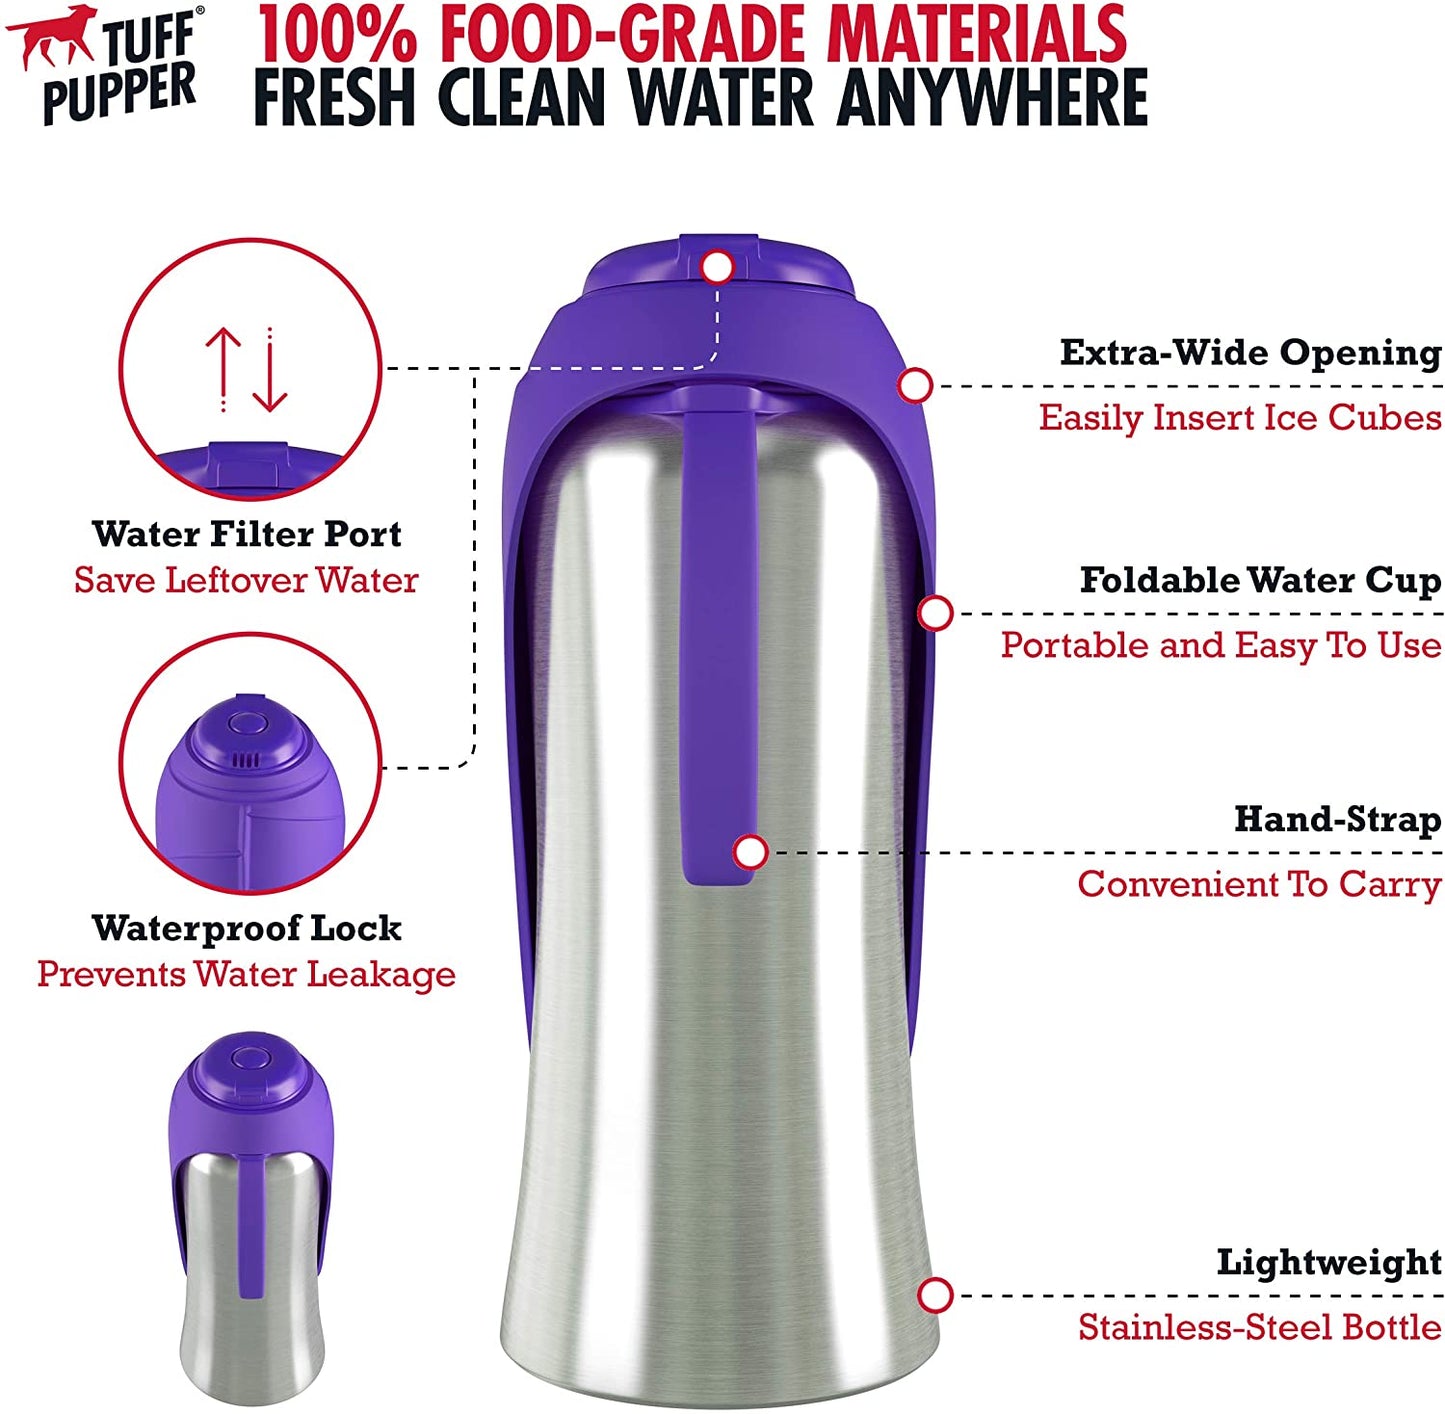 Tuff Pupper PupFlask Portable Water Bottle | 27 or 40 OZ Stainless Steel | Convenient Dog Travel Water Bottle Keeps Pup Hydrated | Portable Dog Water Bowl & Travel Water Bottle for Dogs - (For 8 piece(s))